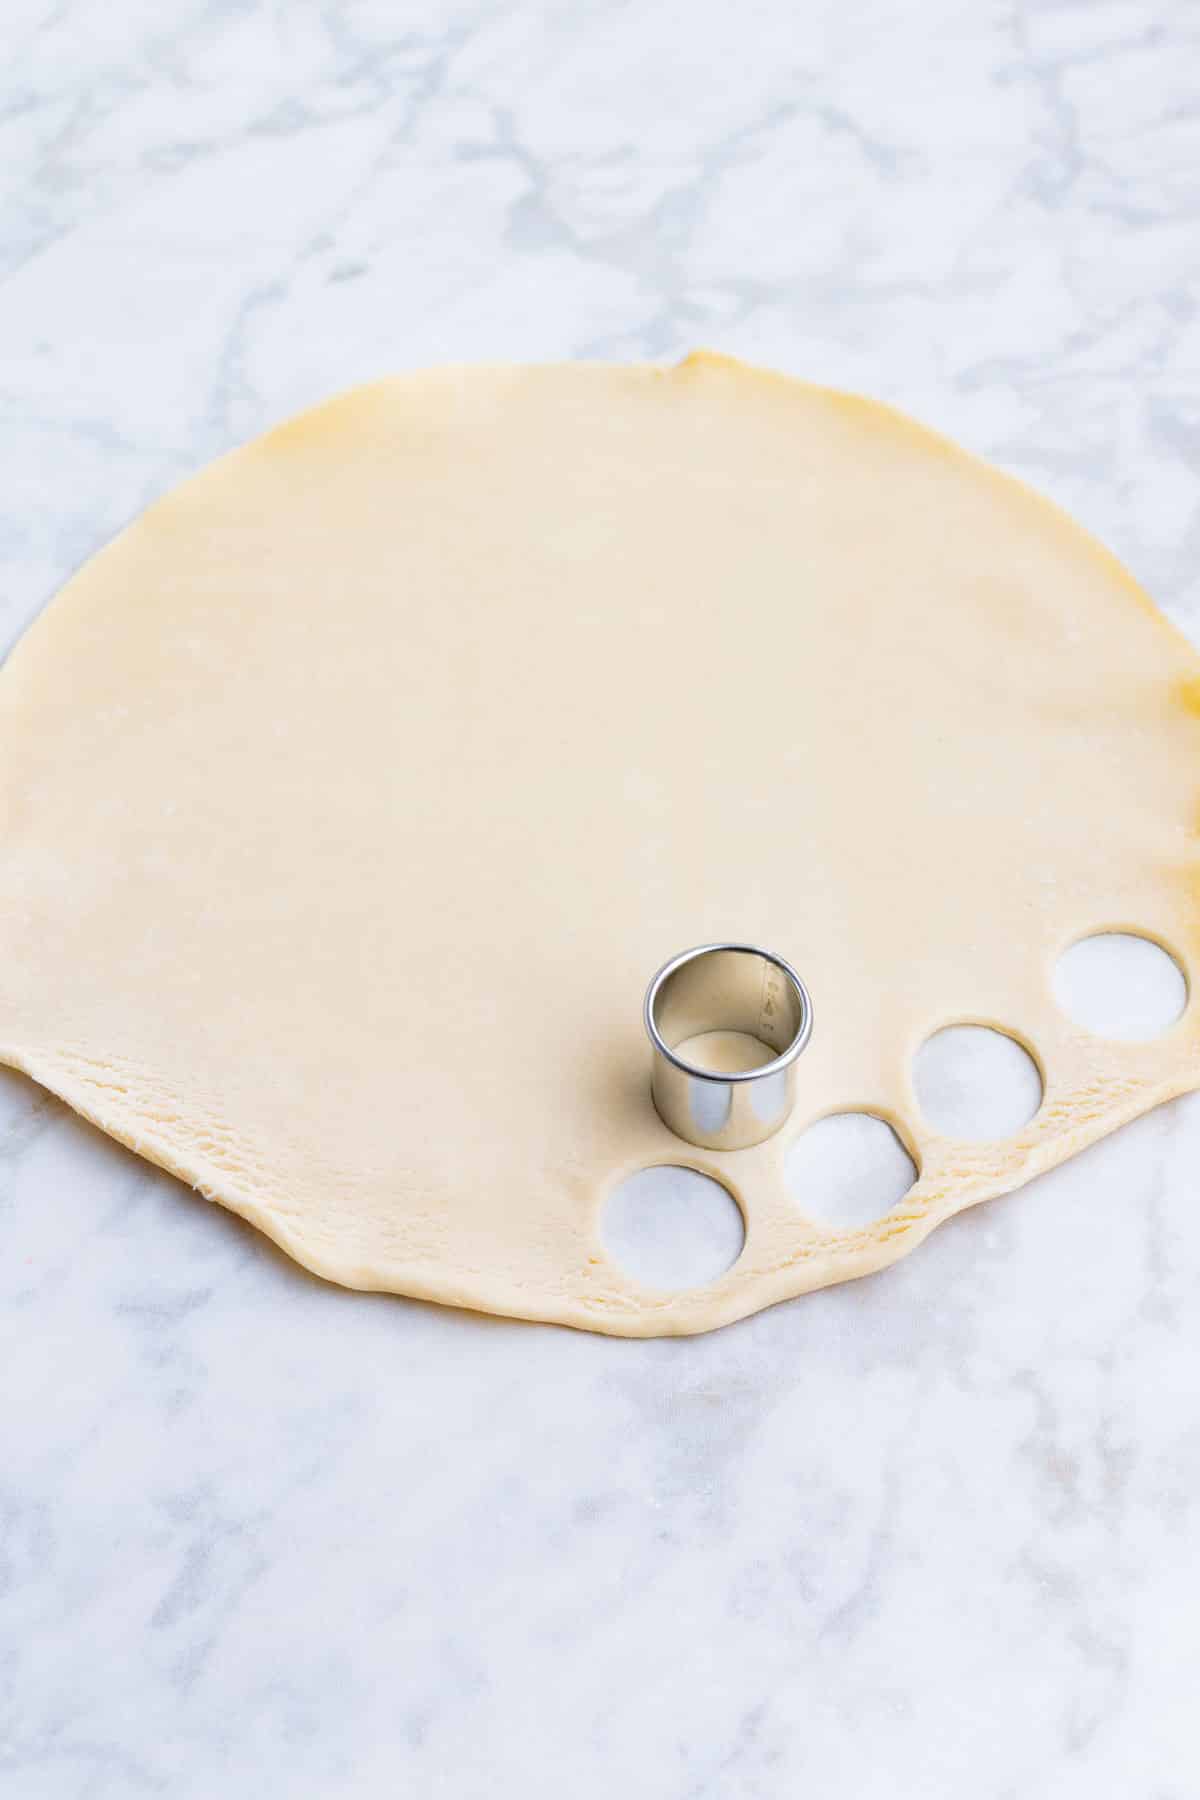 Pie crust is cut into small circles.